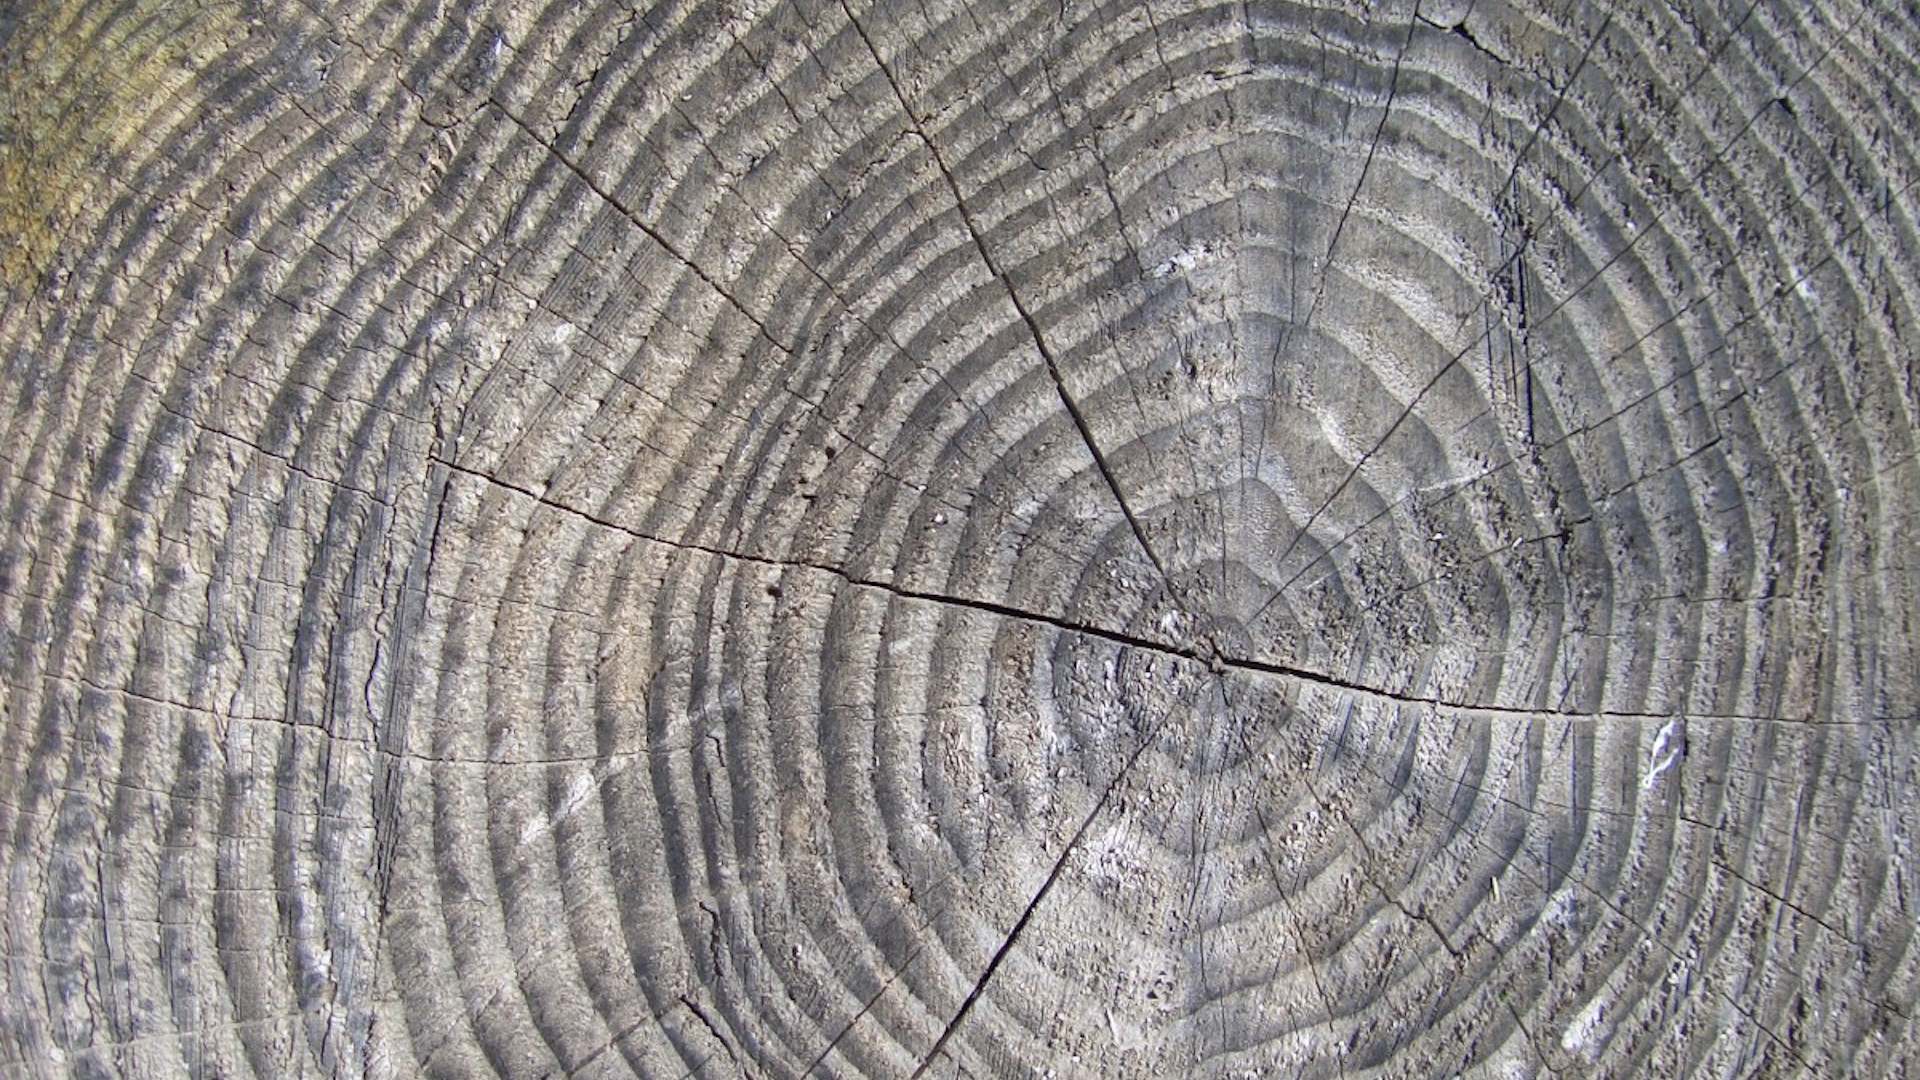 Tree rings tell a story of natural history.